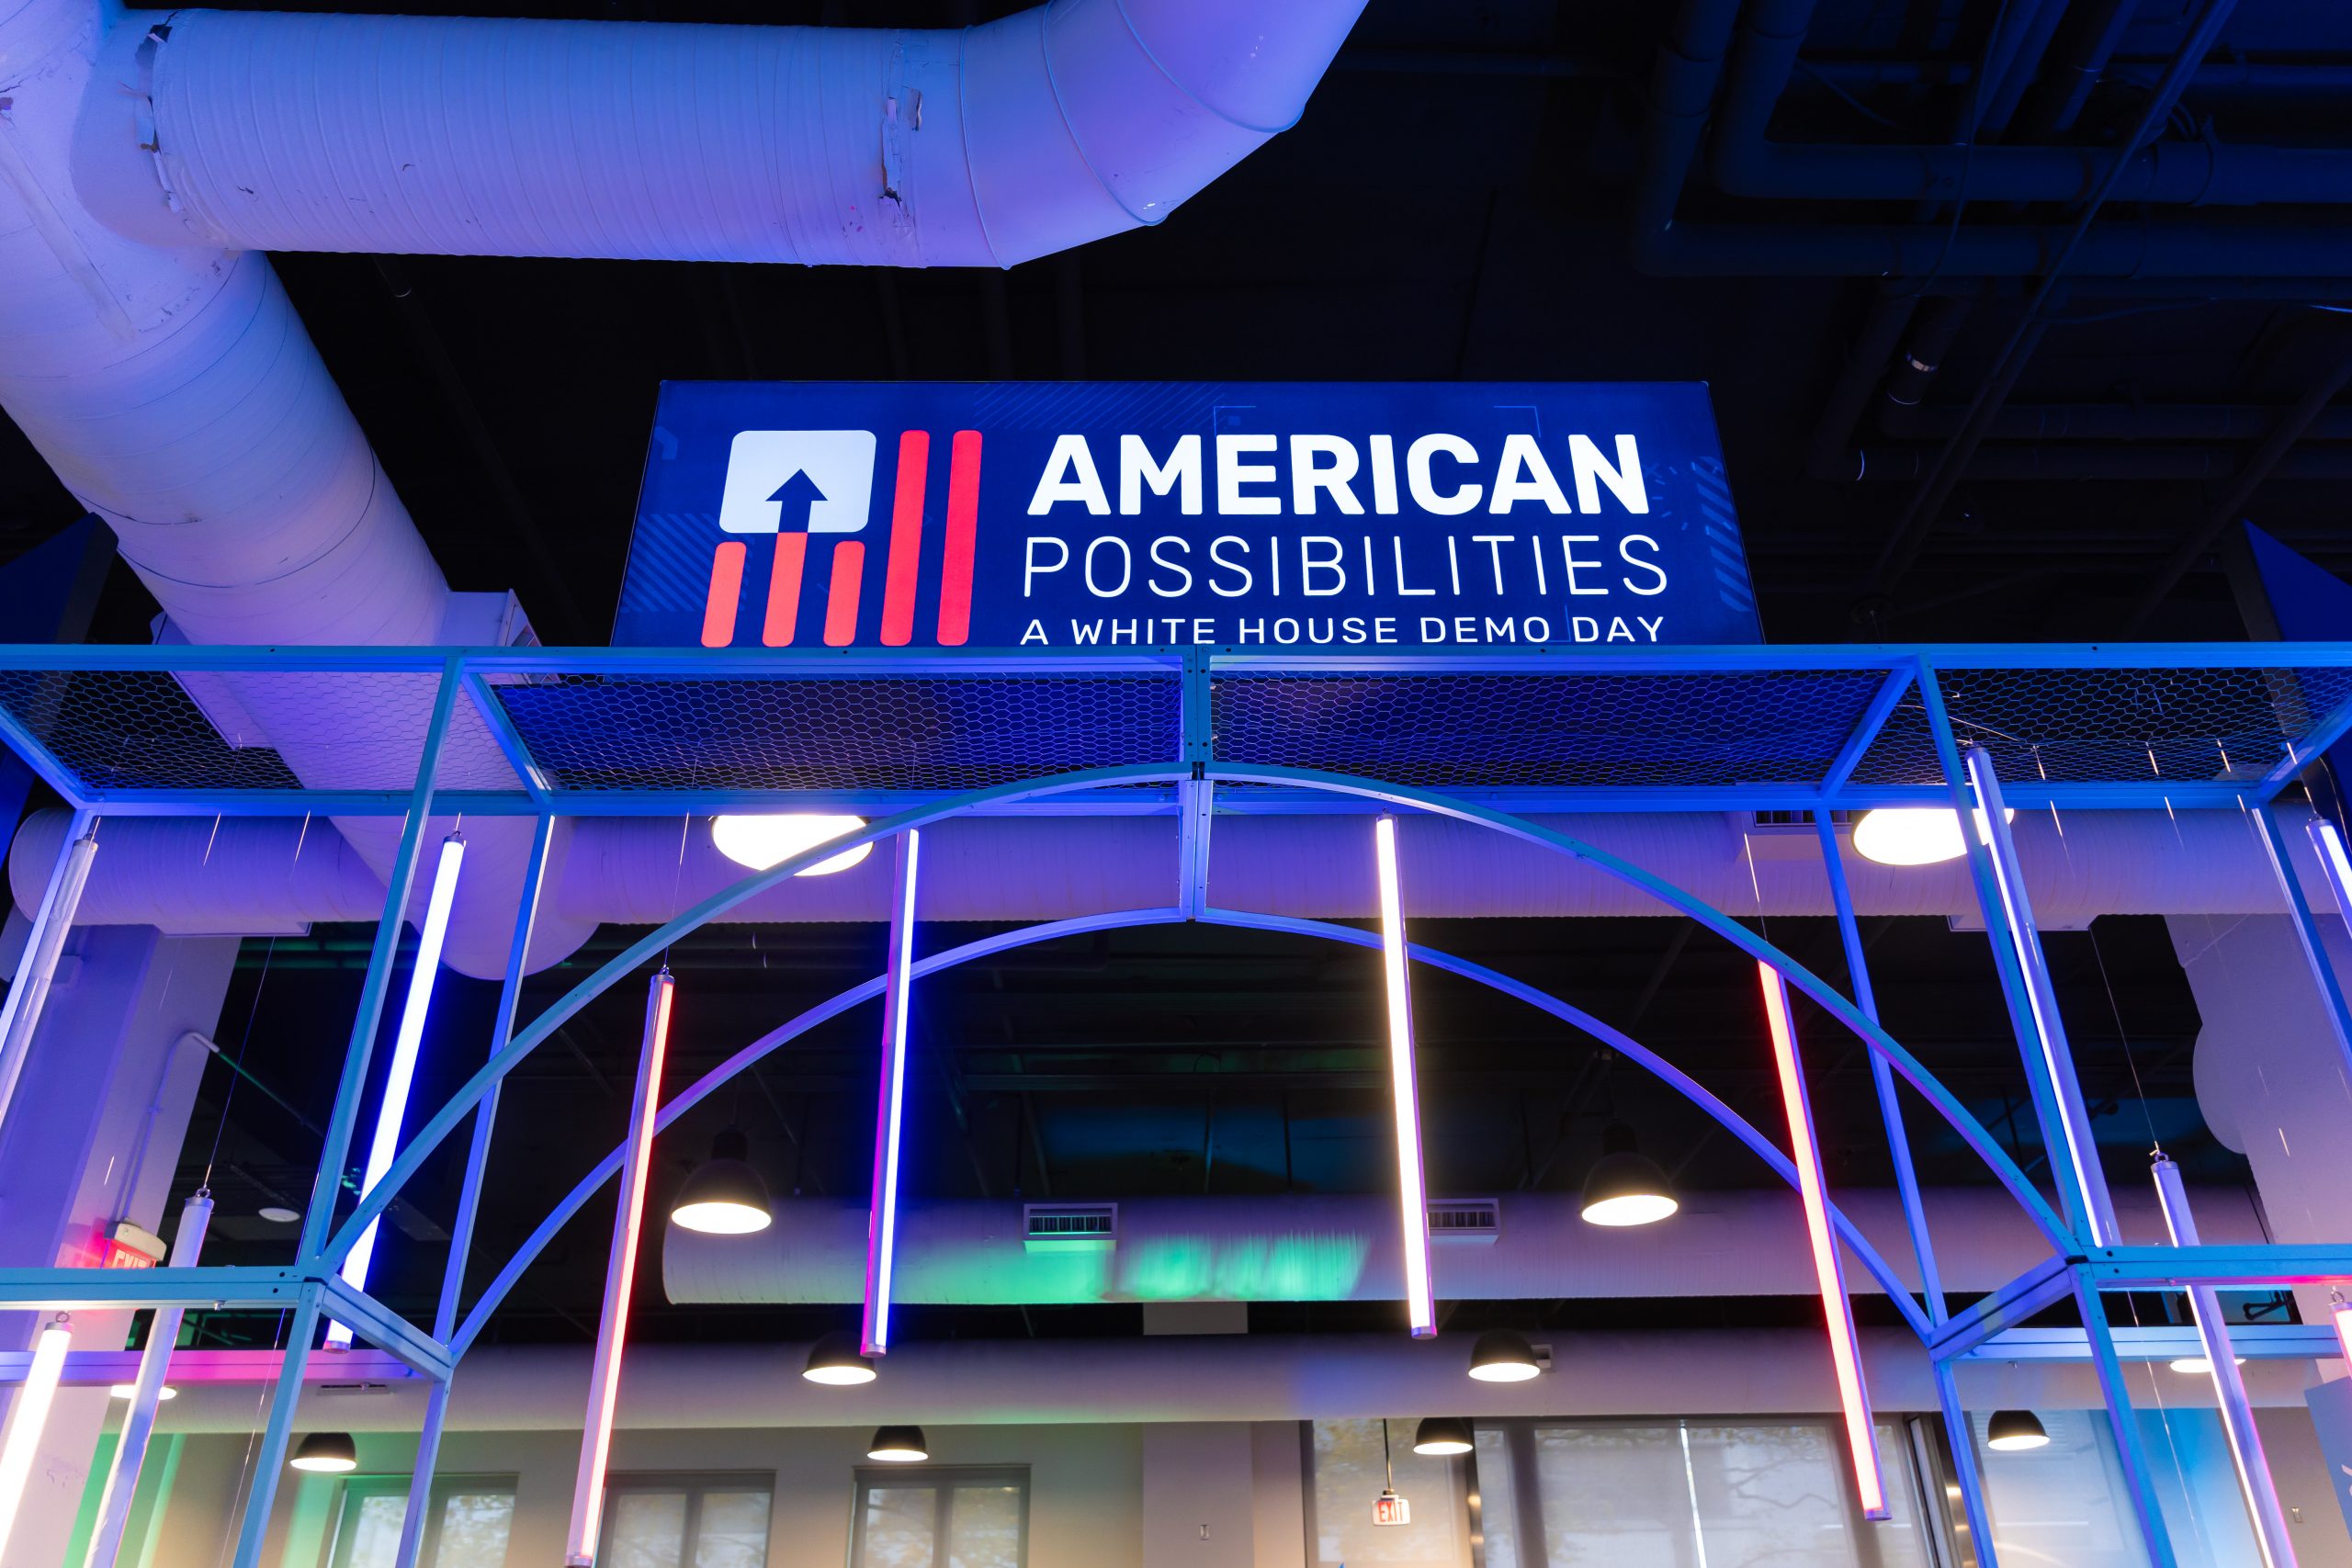 American Possibilities Signage